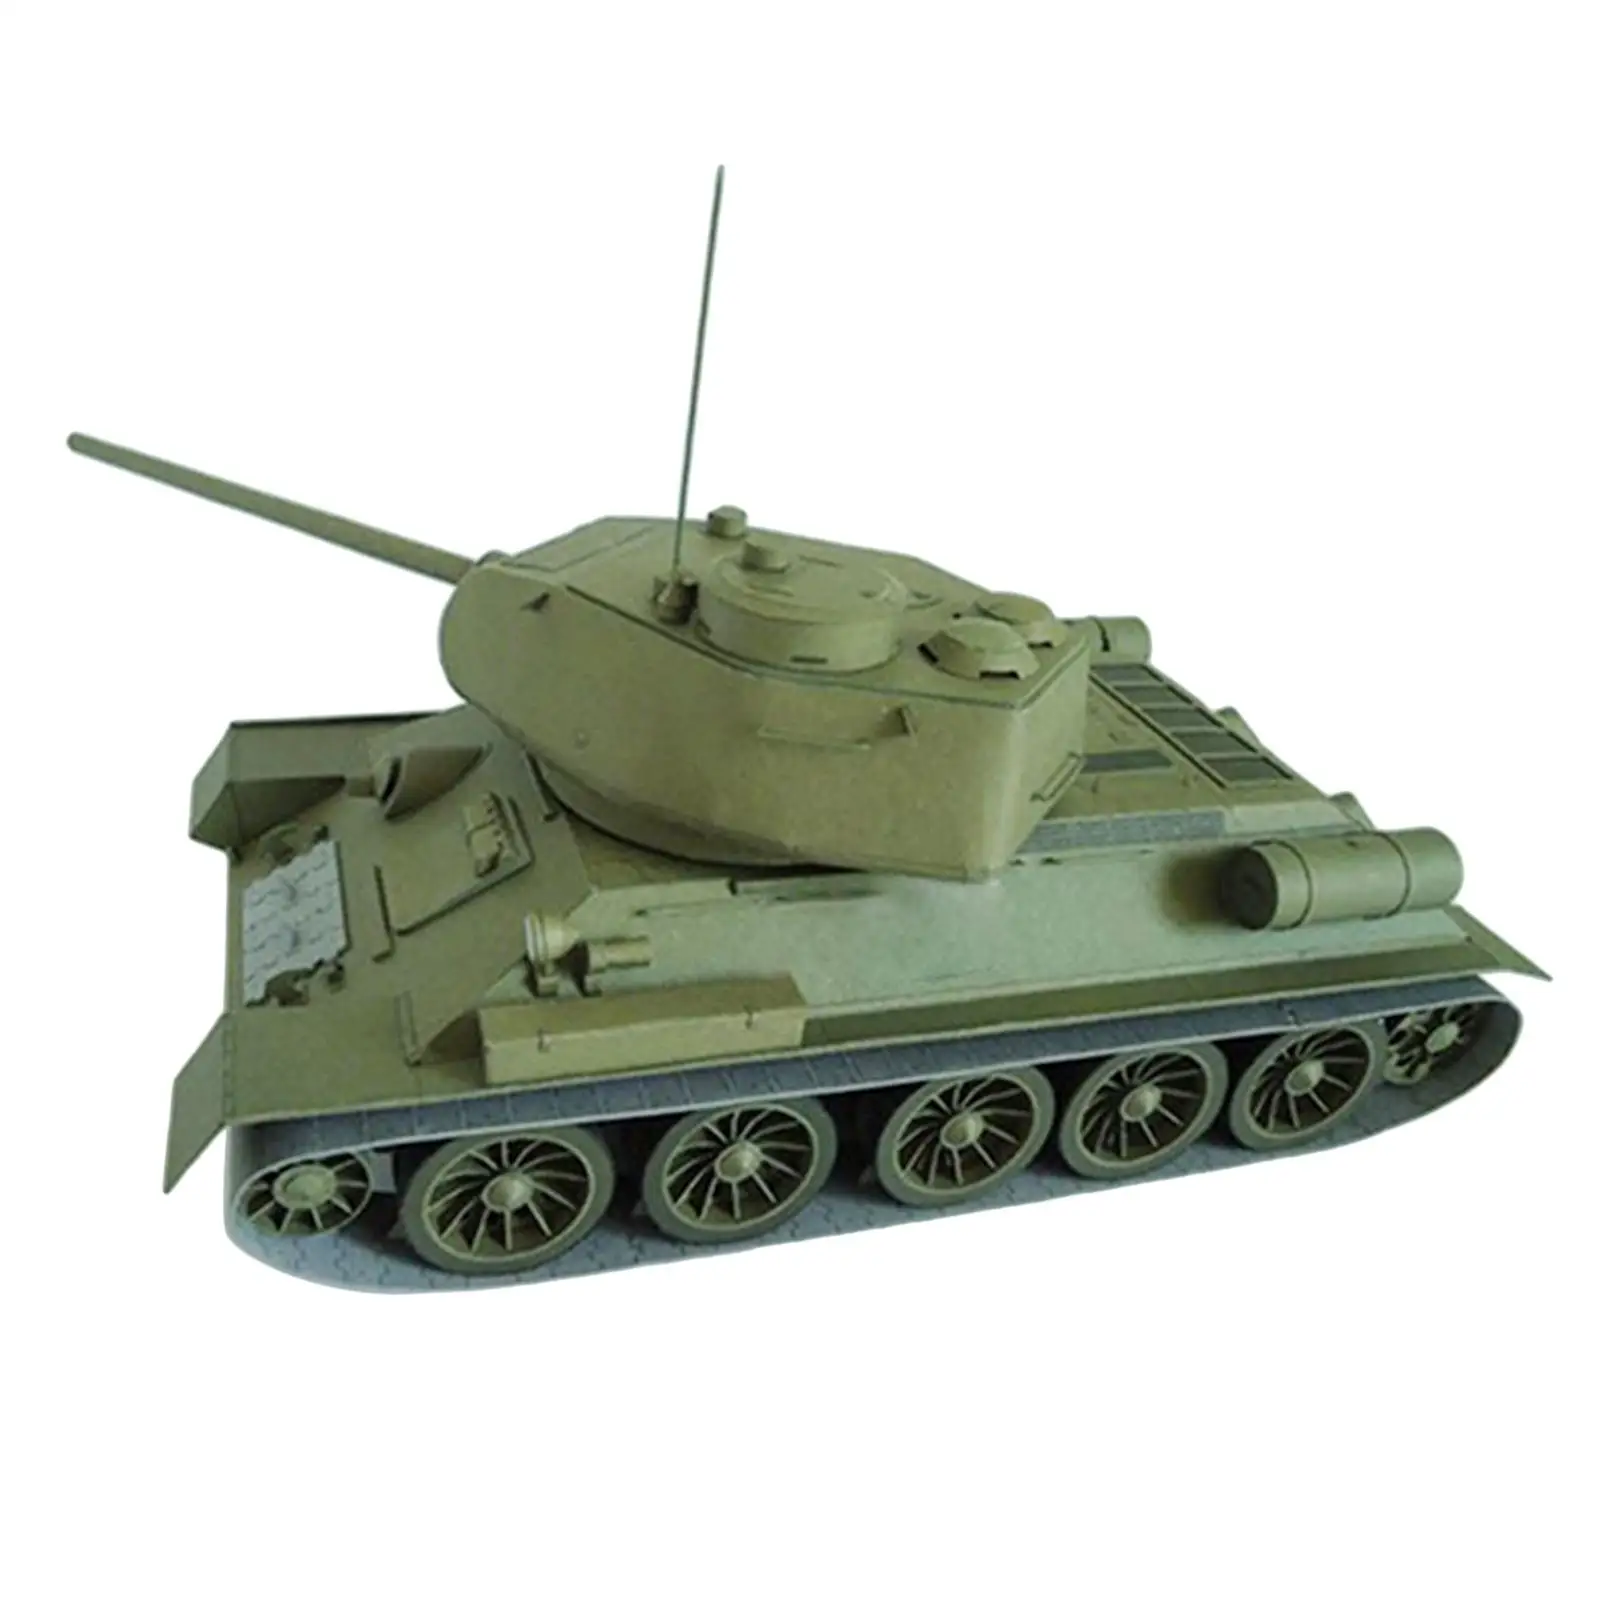 1/25 Tank Model 3D Paper Puzzle Tabletop Decor,Cardboard Collectables Building Kits for Adults Children